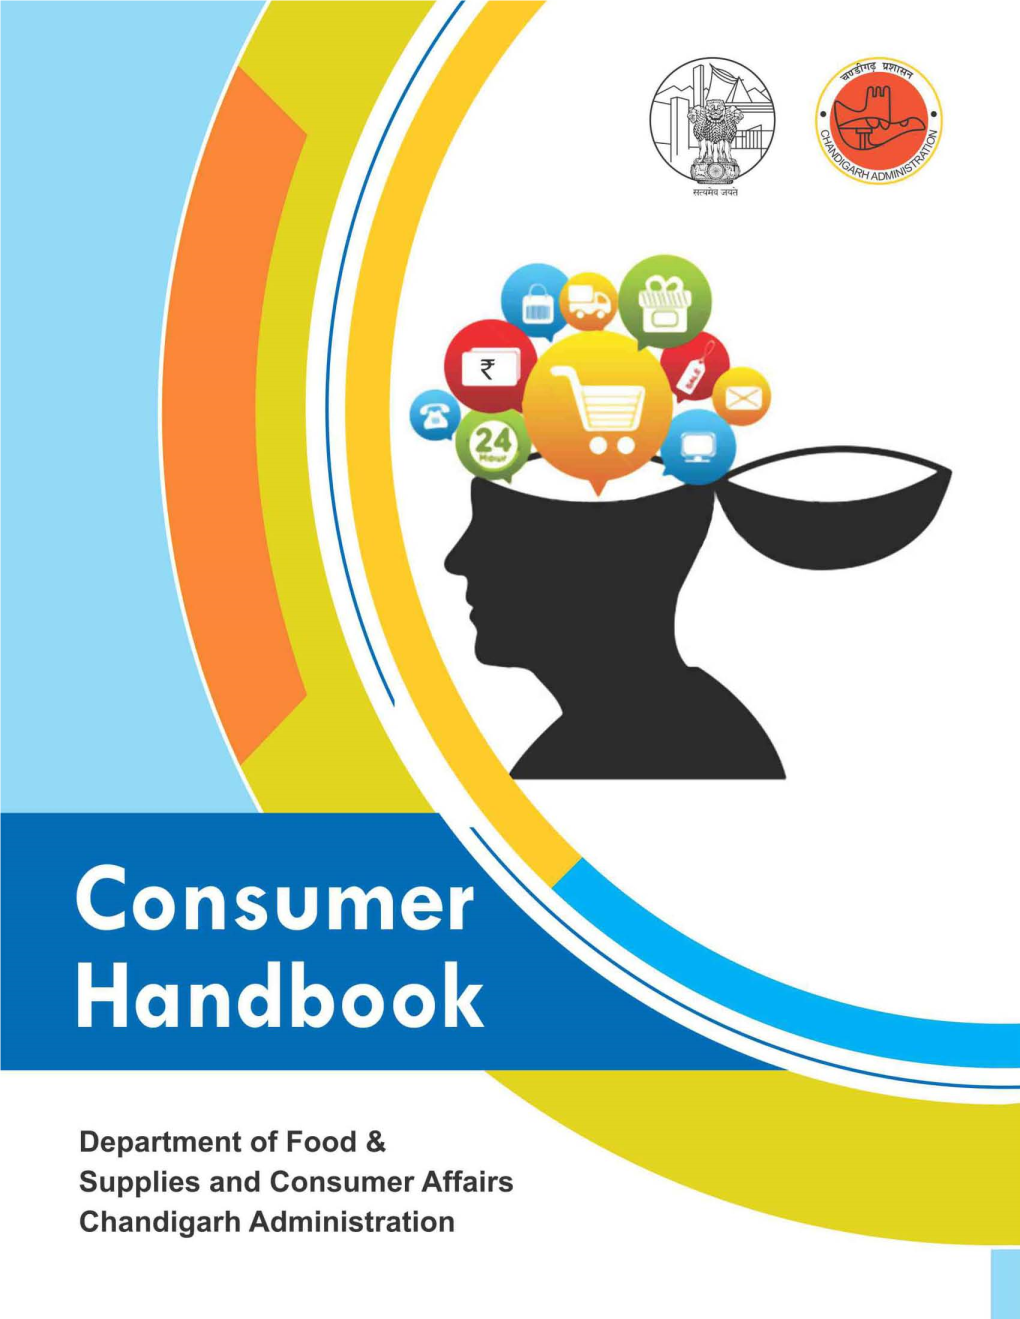 Consumer Handbook" Is Being Published by the Chandigarh Administration on the Occasion of National Consumer Day, 2014